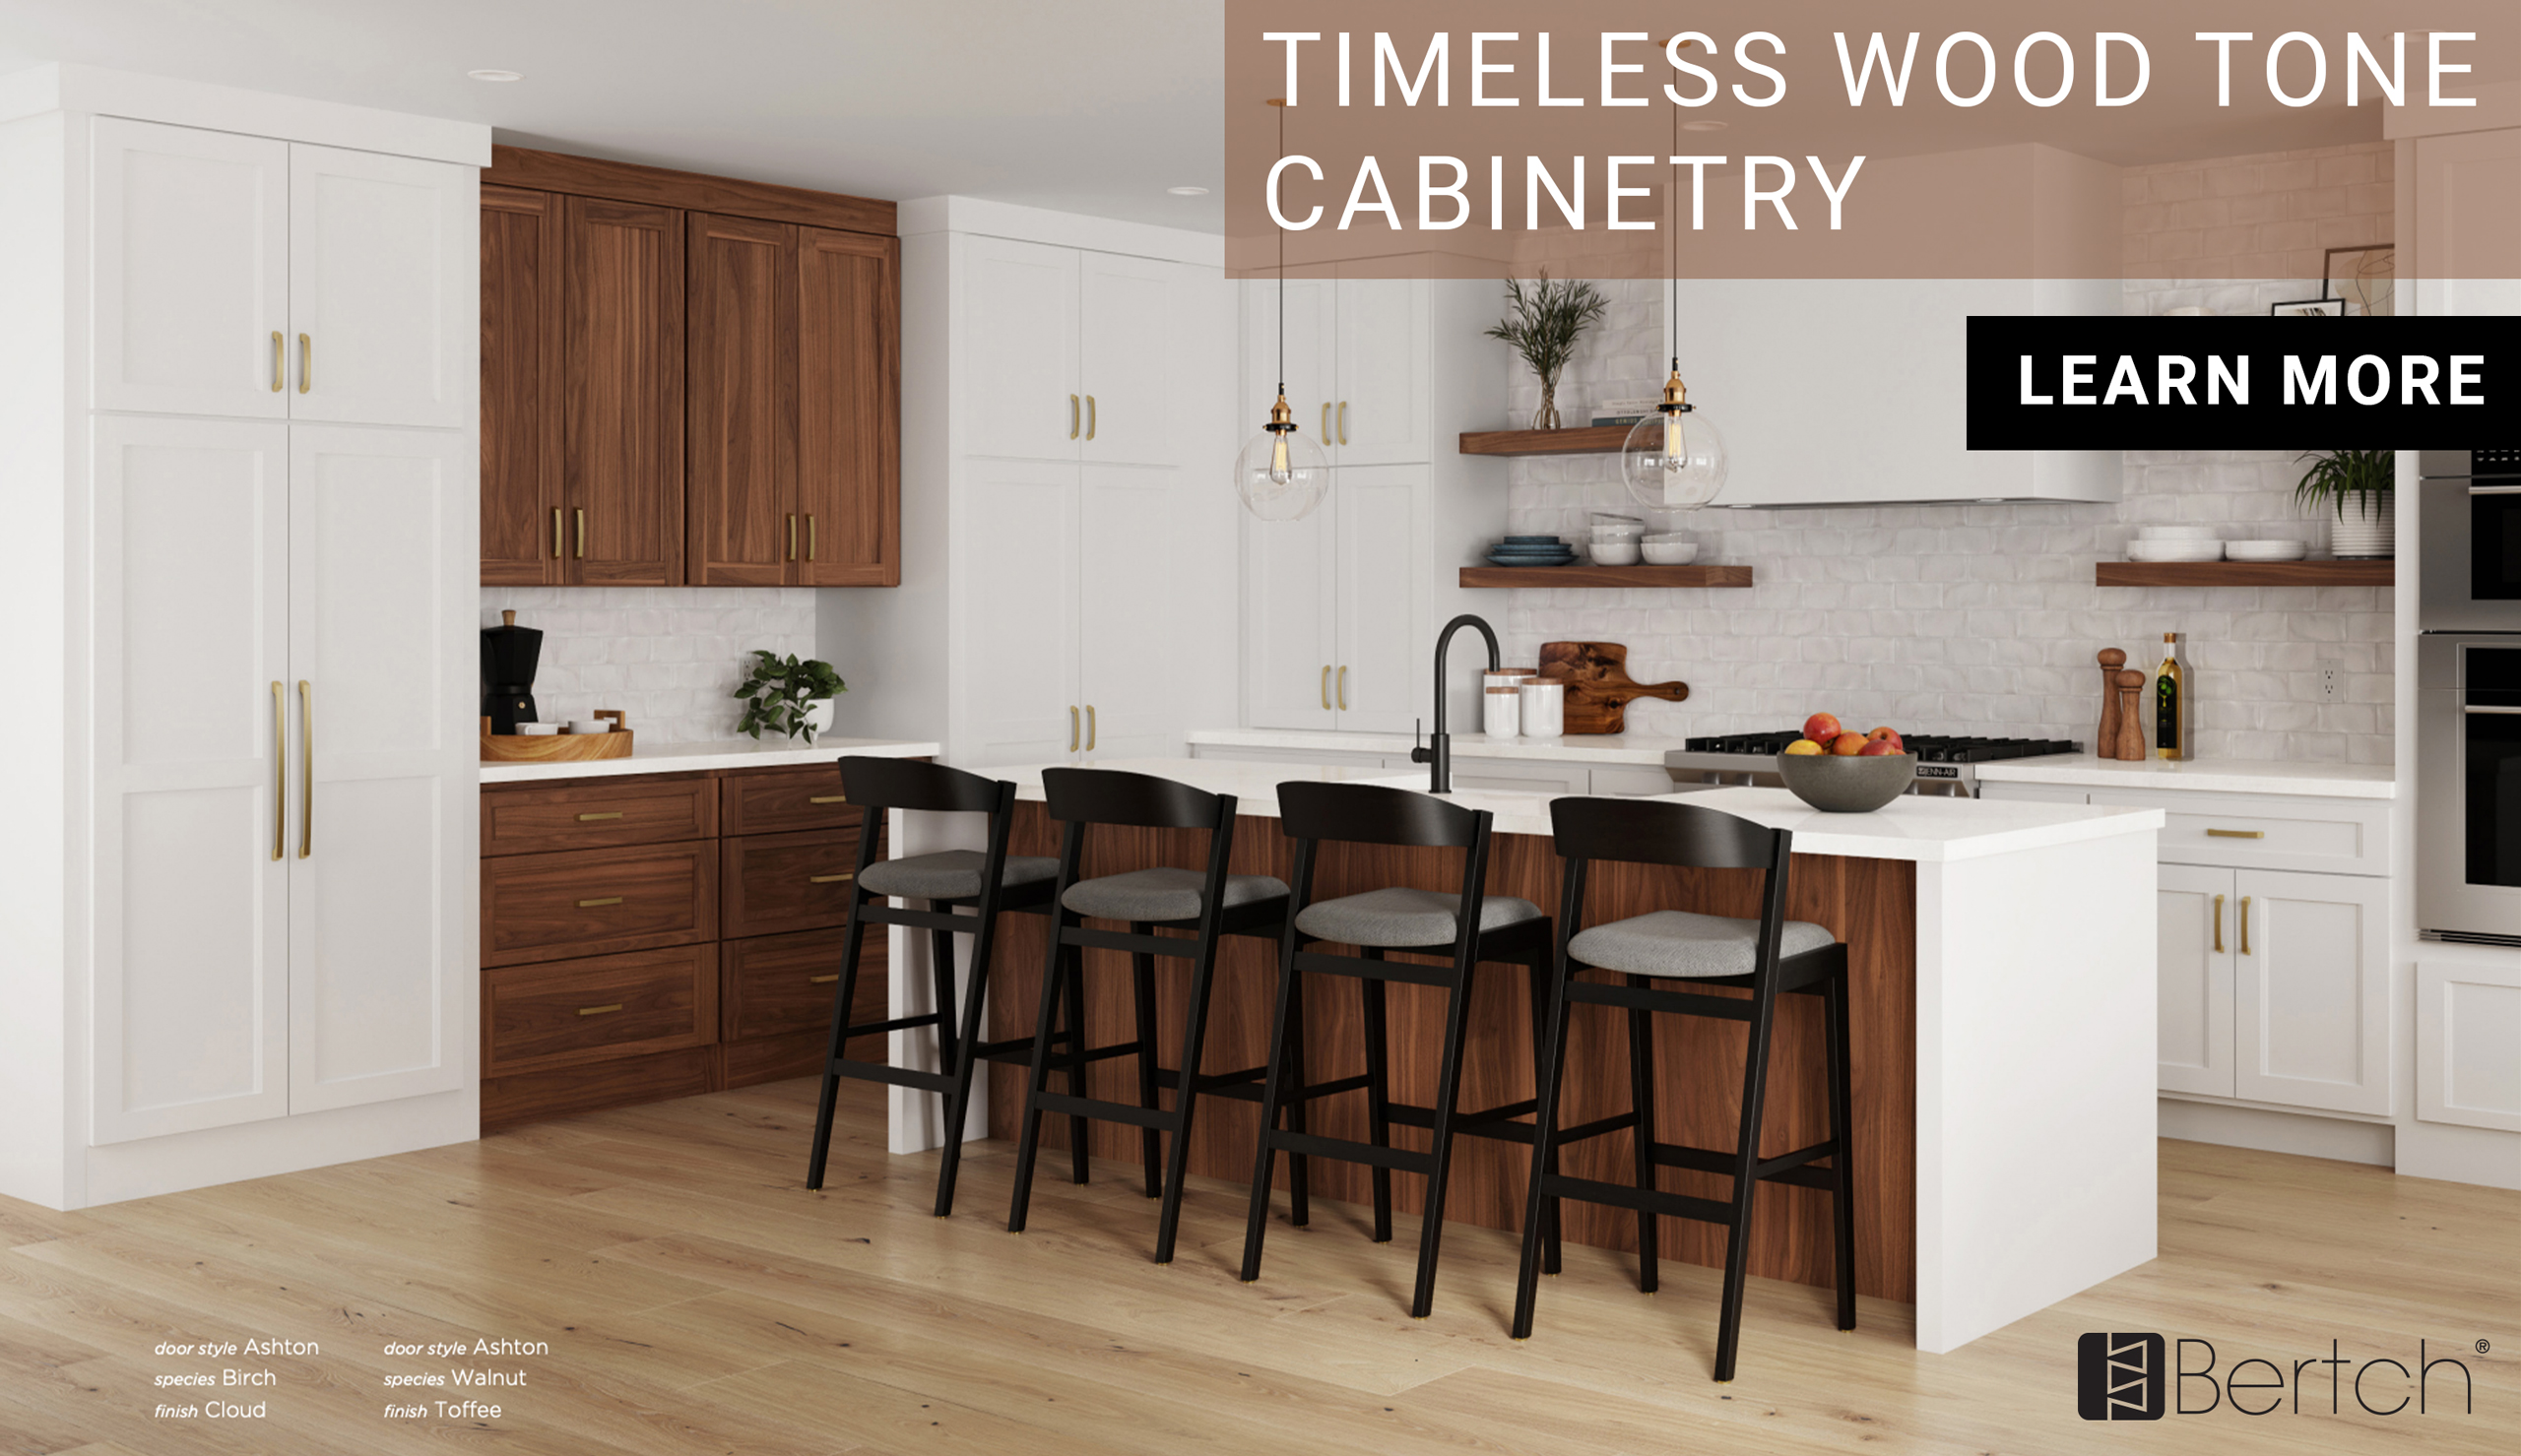 walnut wood cabinetry, shaker white cabinets, two toned kitchen cabinets